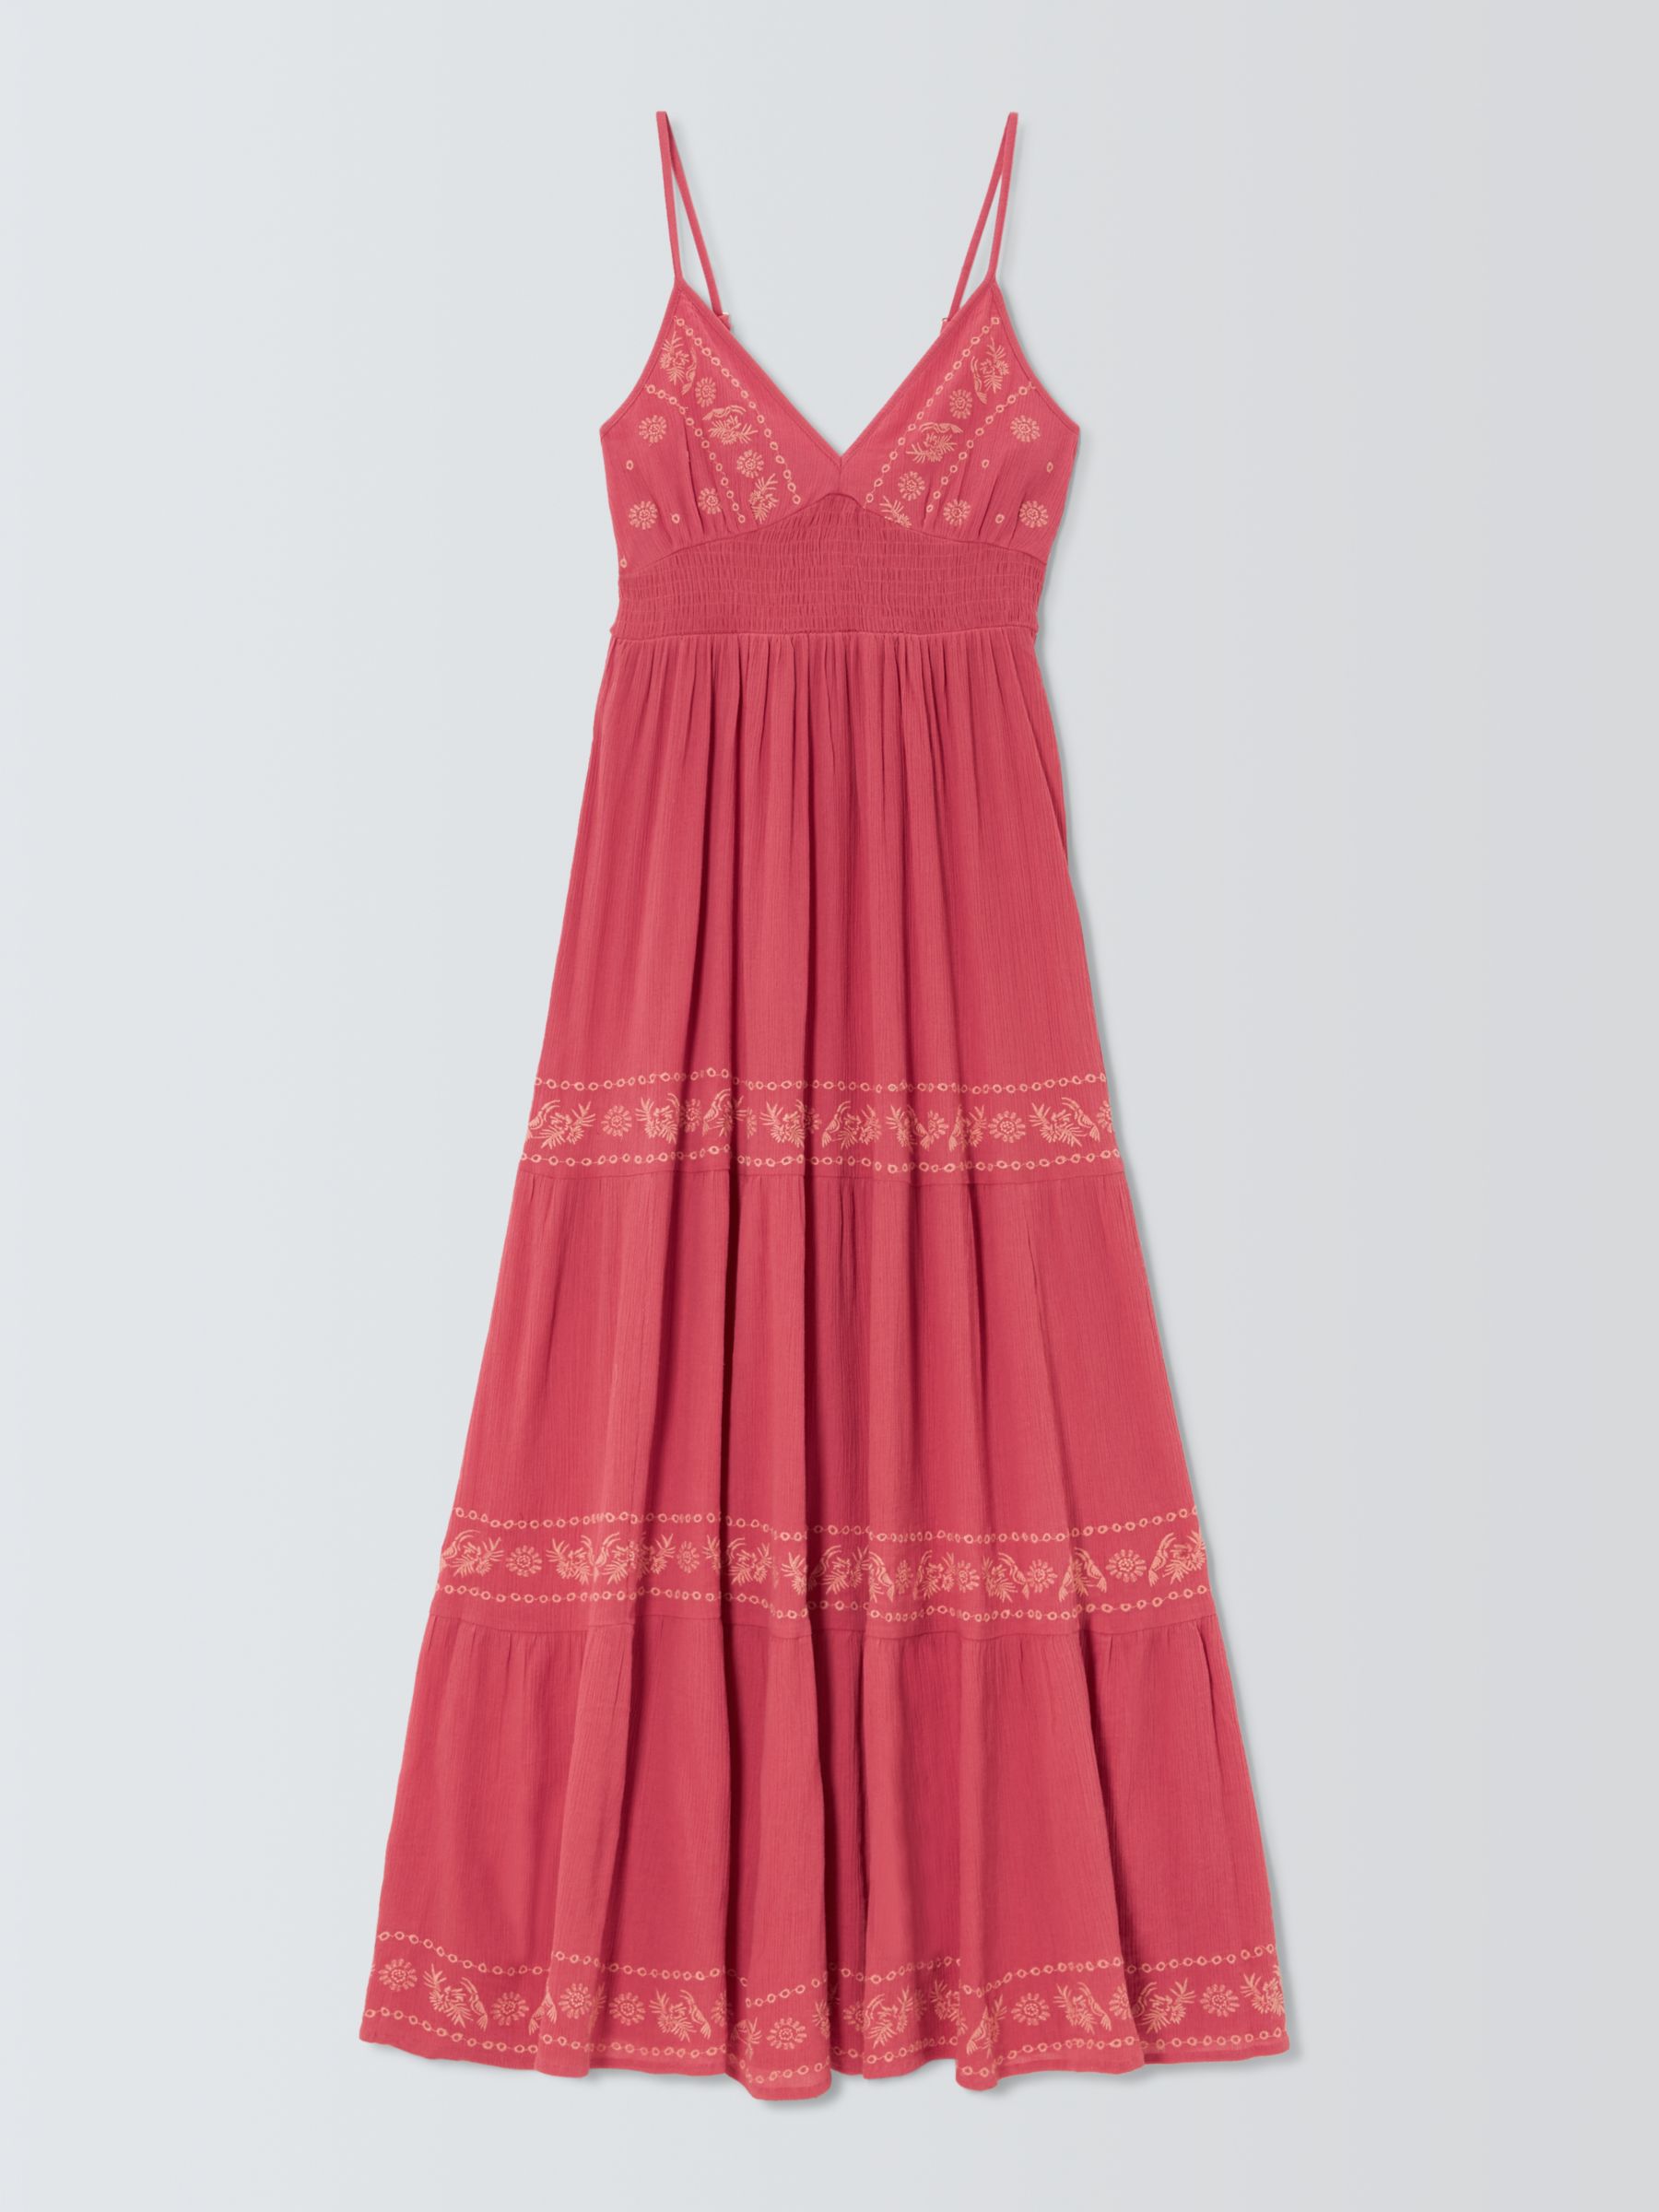 AND/OR Tropic Embroidered Maxi Dress, Pink, S